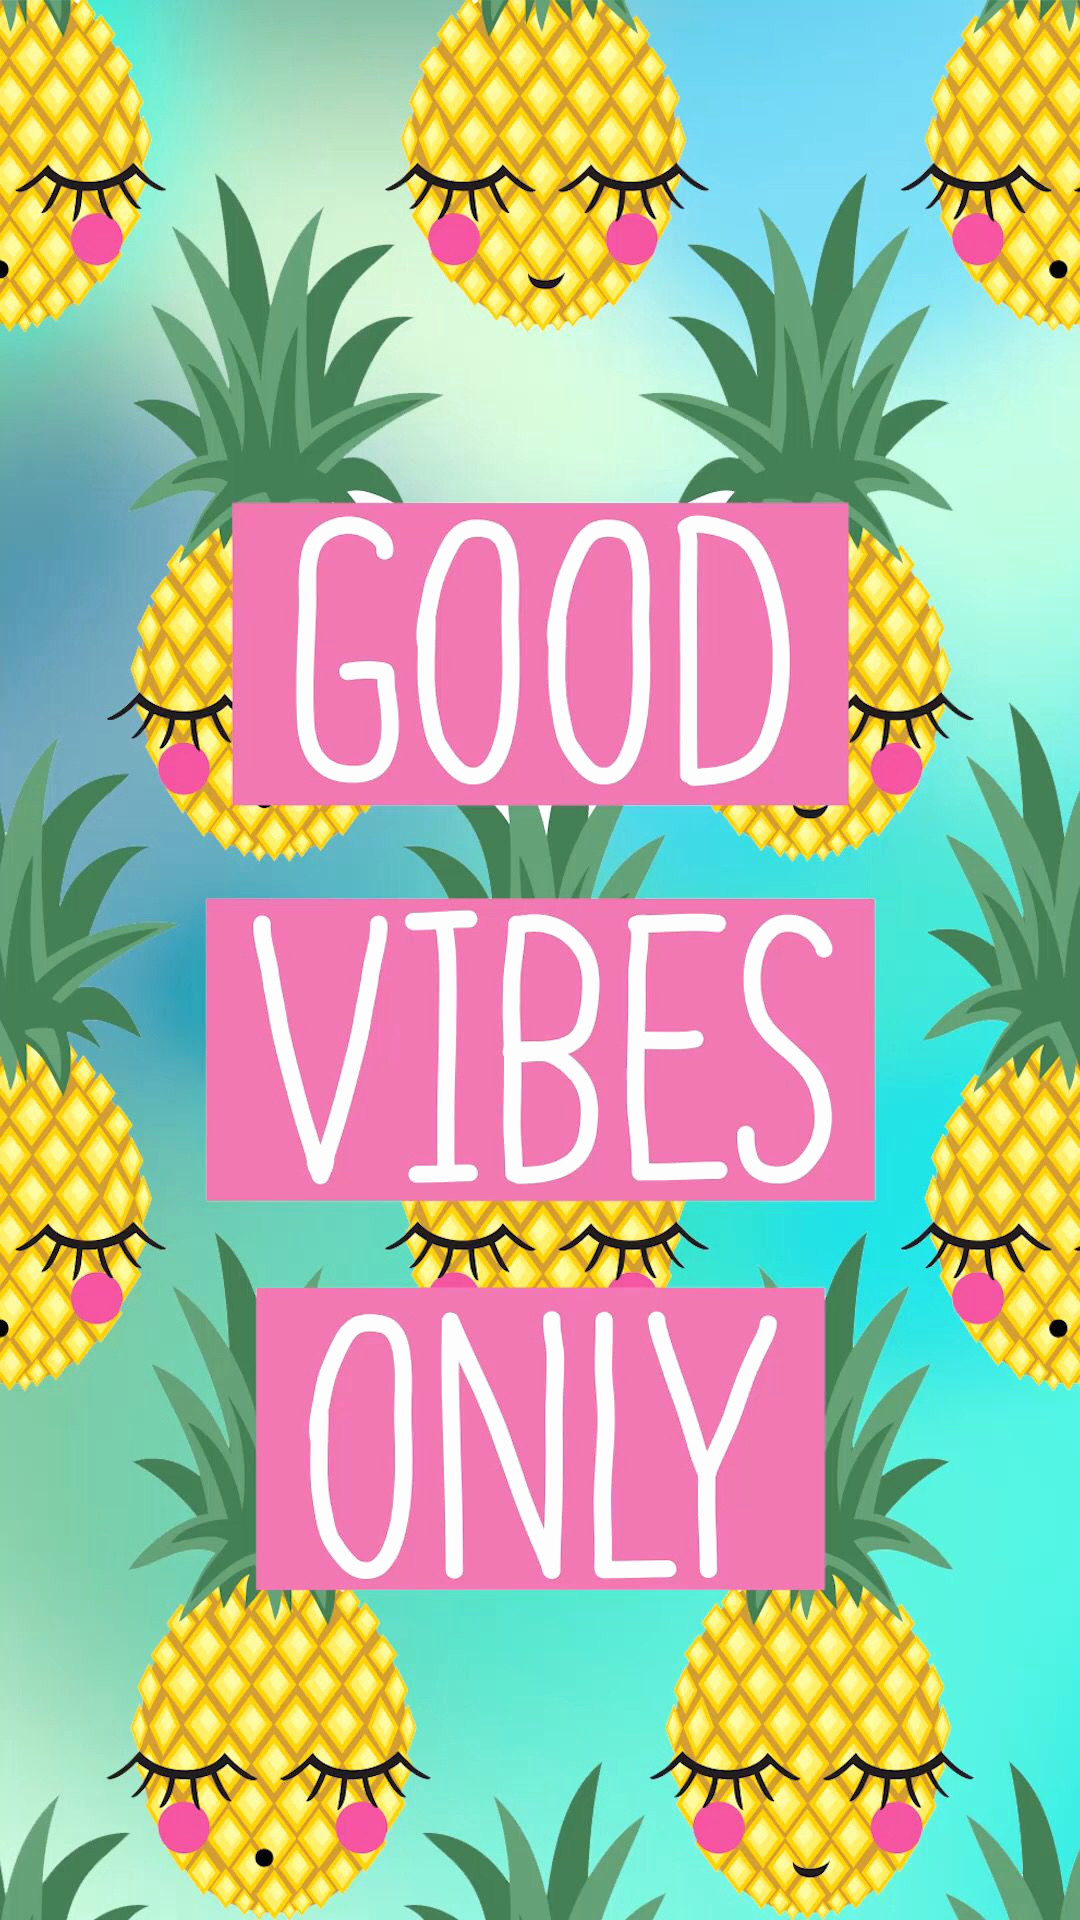 Cute Food Wallpapers High Quality, Amazing Wallpapers - Good Vibes Only Pineapple - HD Wallpaper 